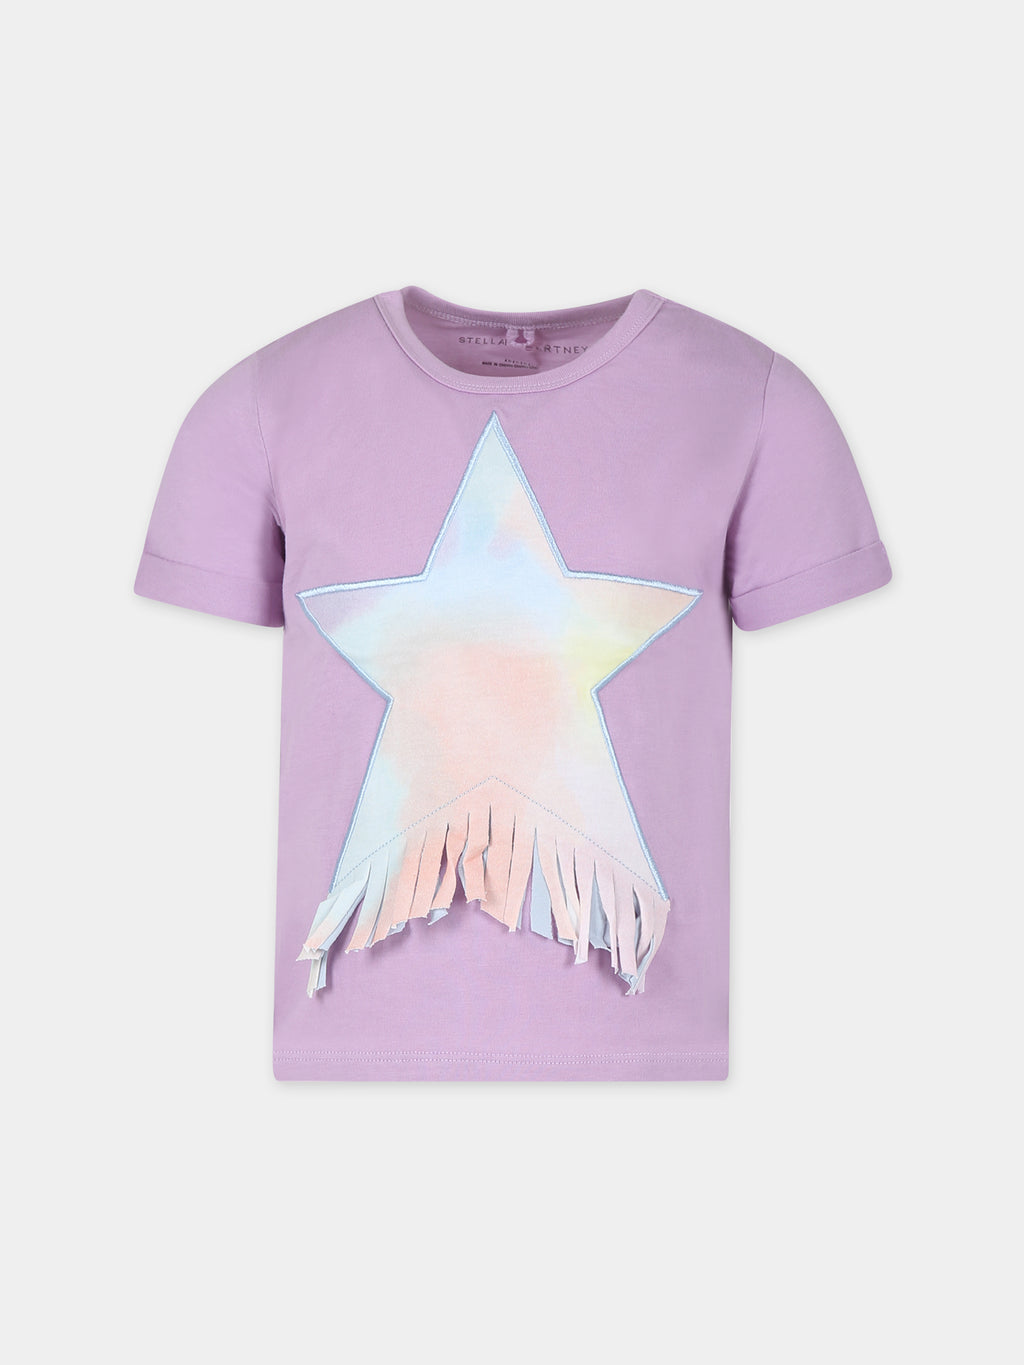 Purple t-shirt for girl with star